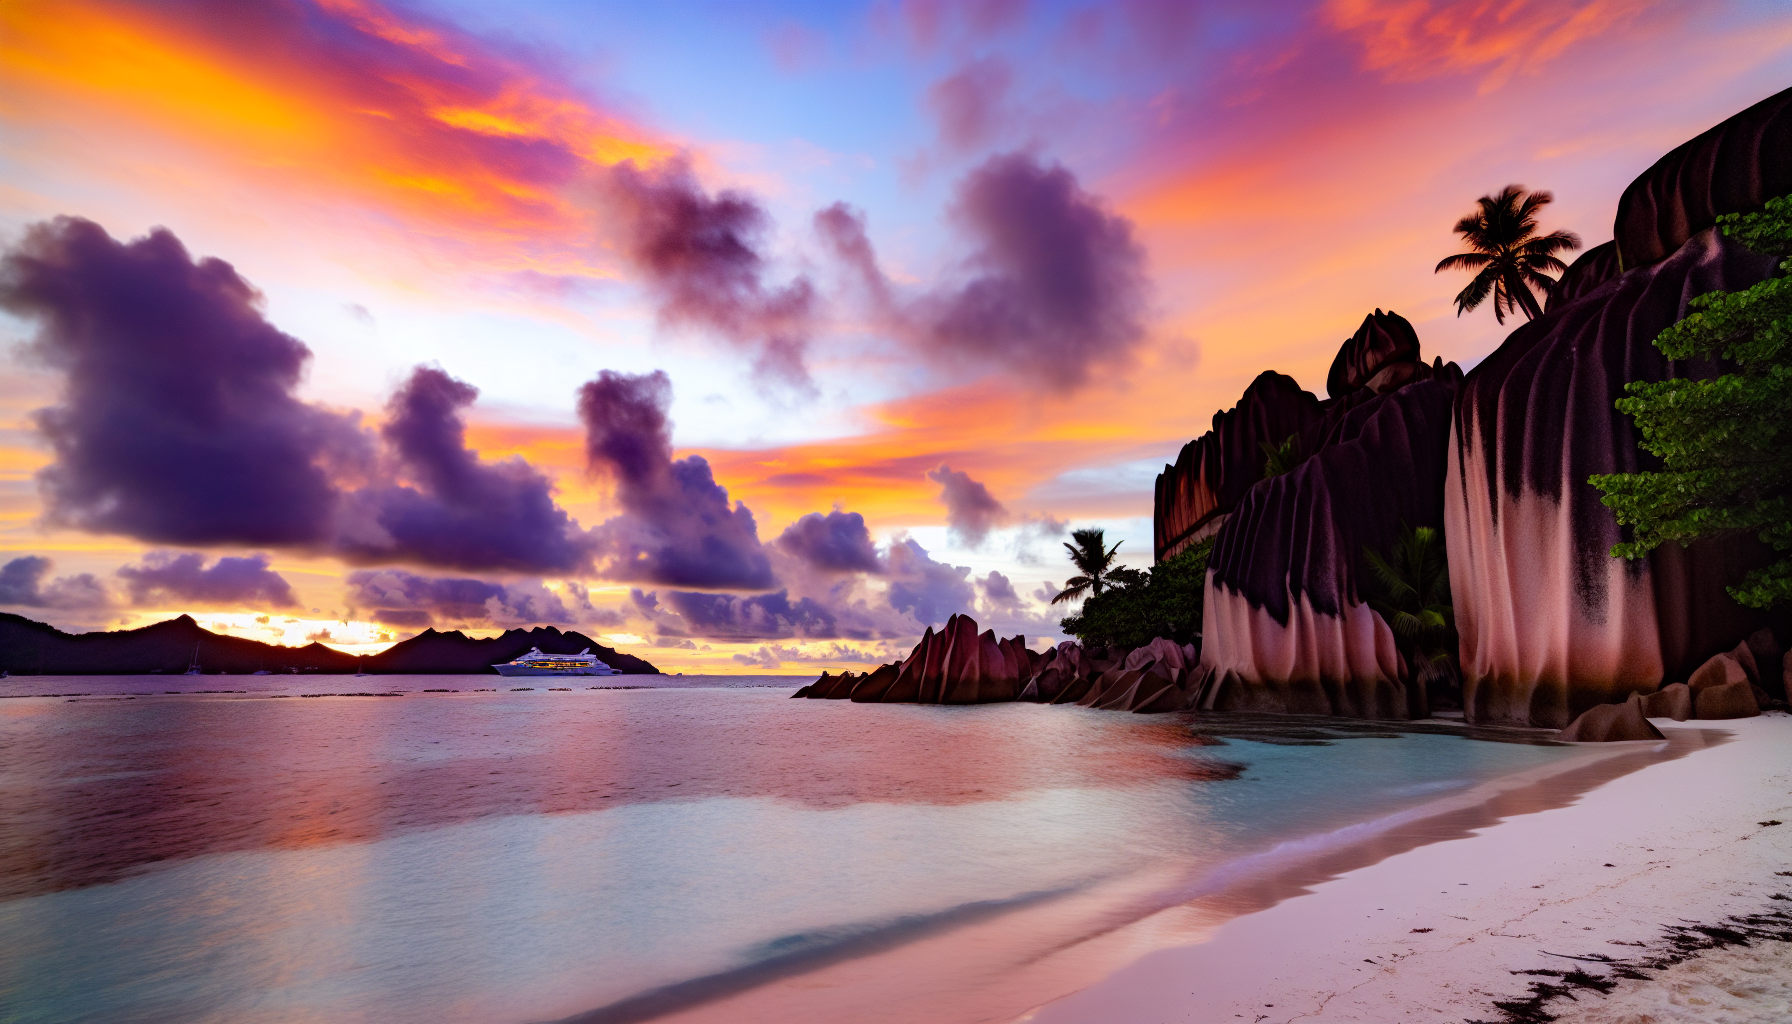 The Seychelles: A Tropical Paradise with towering granite rocks and sparkling white sand beaches